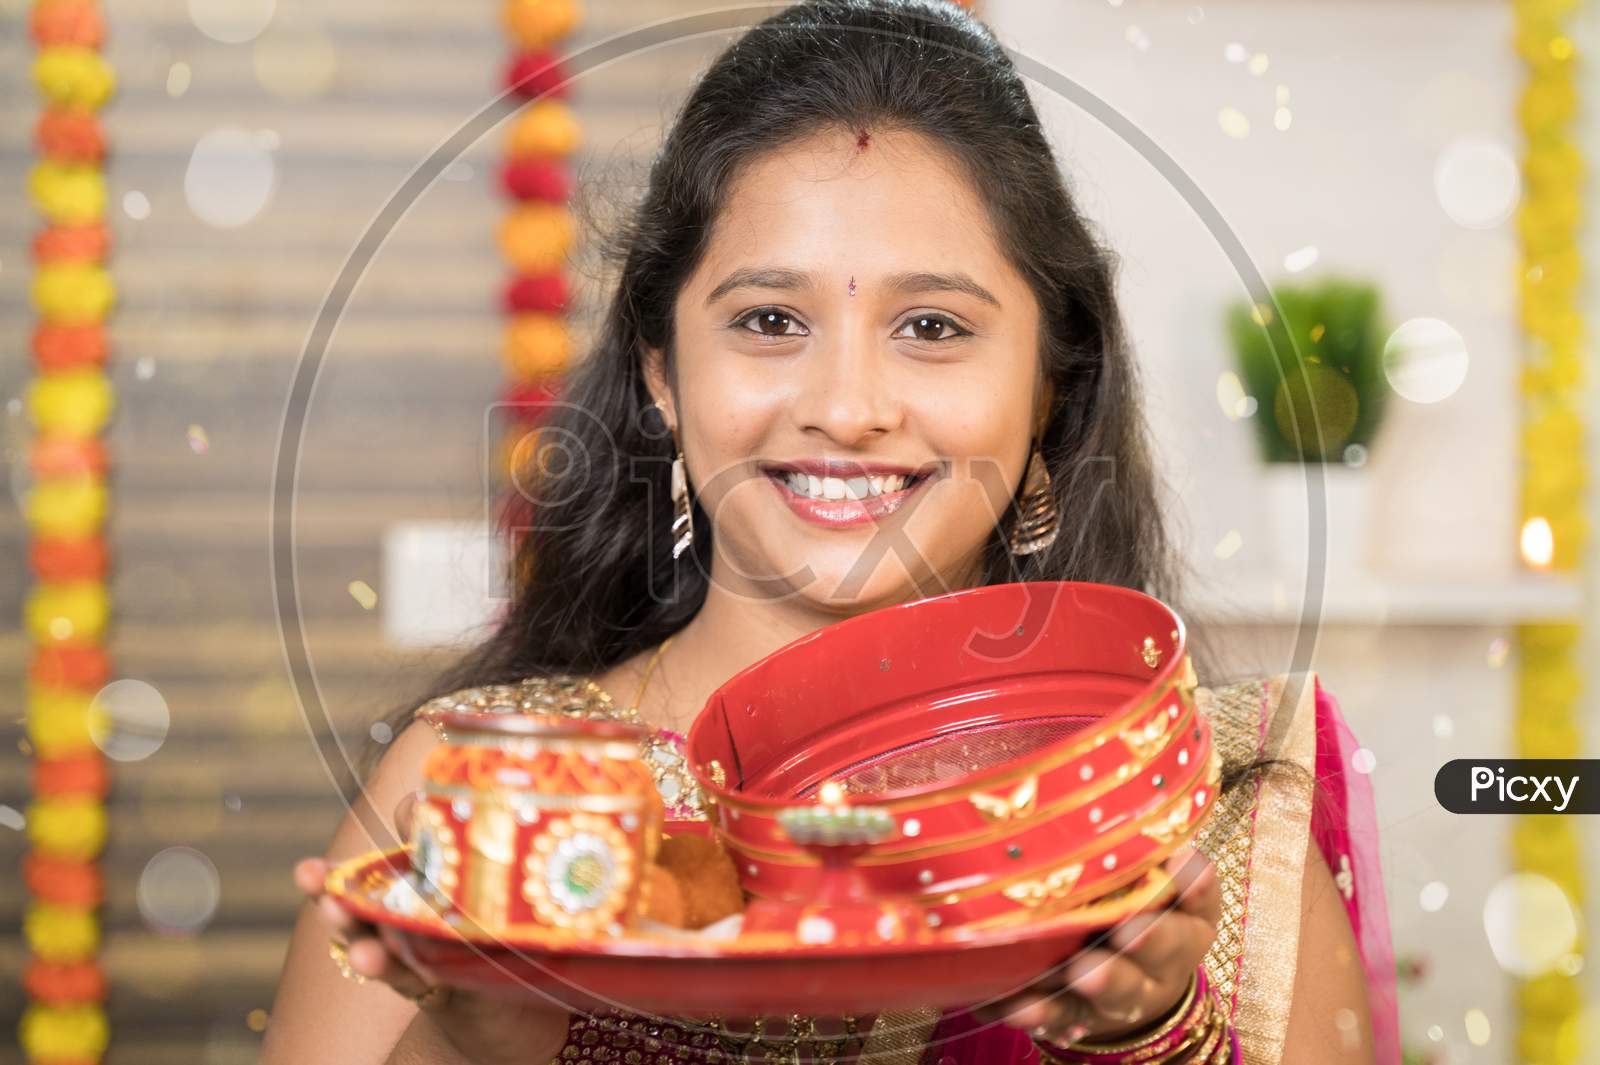 Close Up Pov Shot Of Indian Married Woman In Traditional Dress Holding Karva Chauth Thali Or Plate And Looking Into Camera During Indian Religious Karwa Chauth Festival.